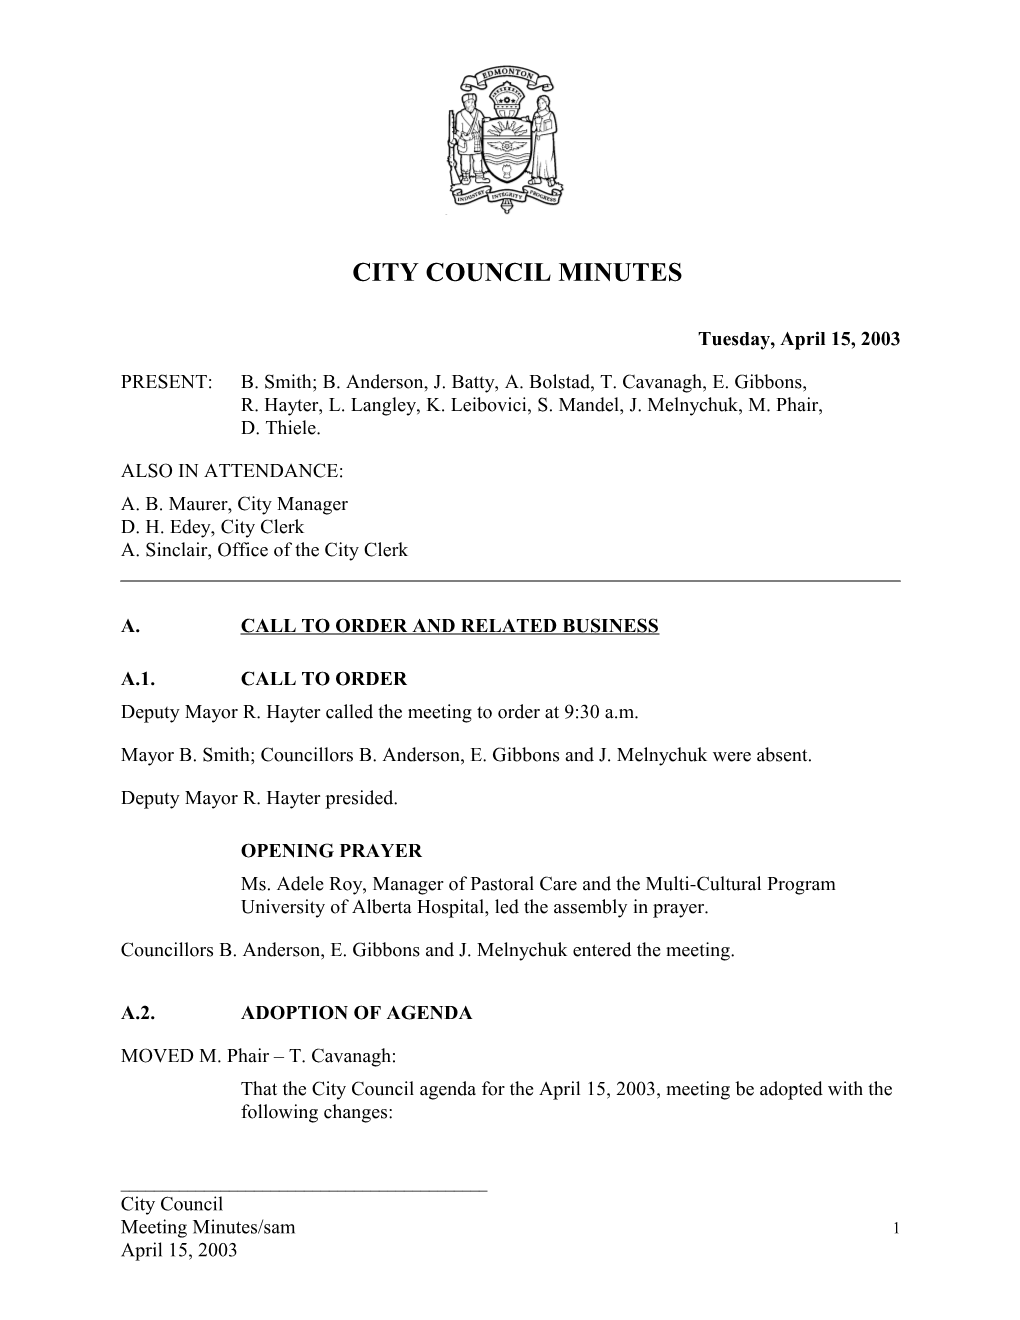 Minutes for City Council April 15, 2003 Meeting